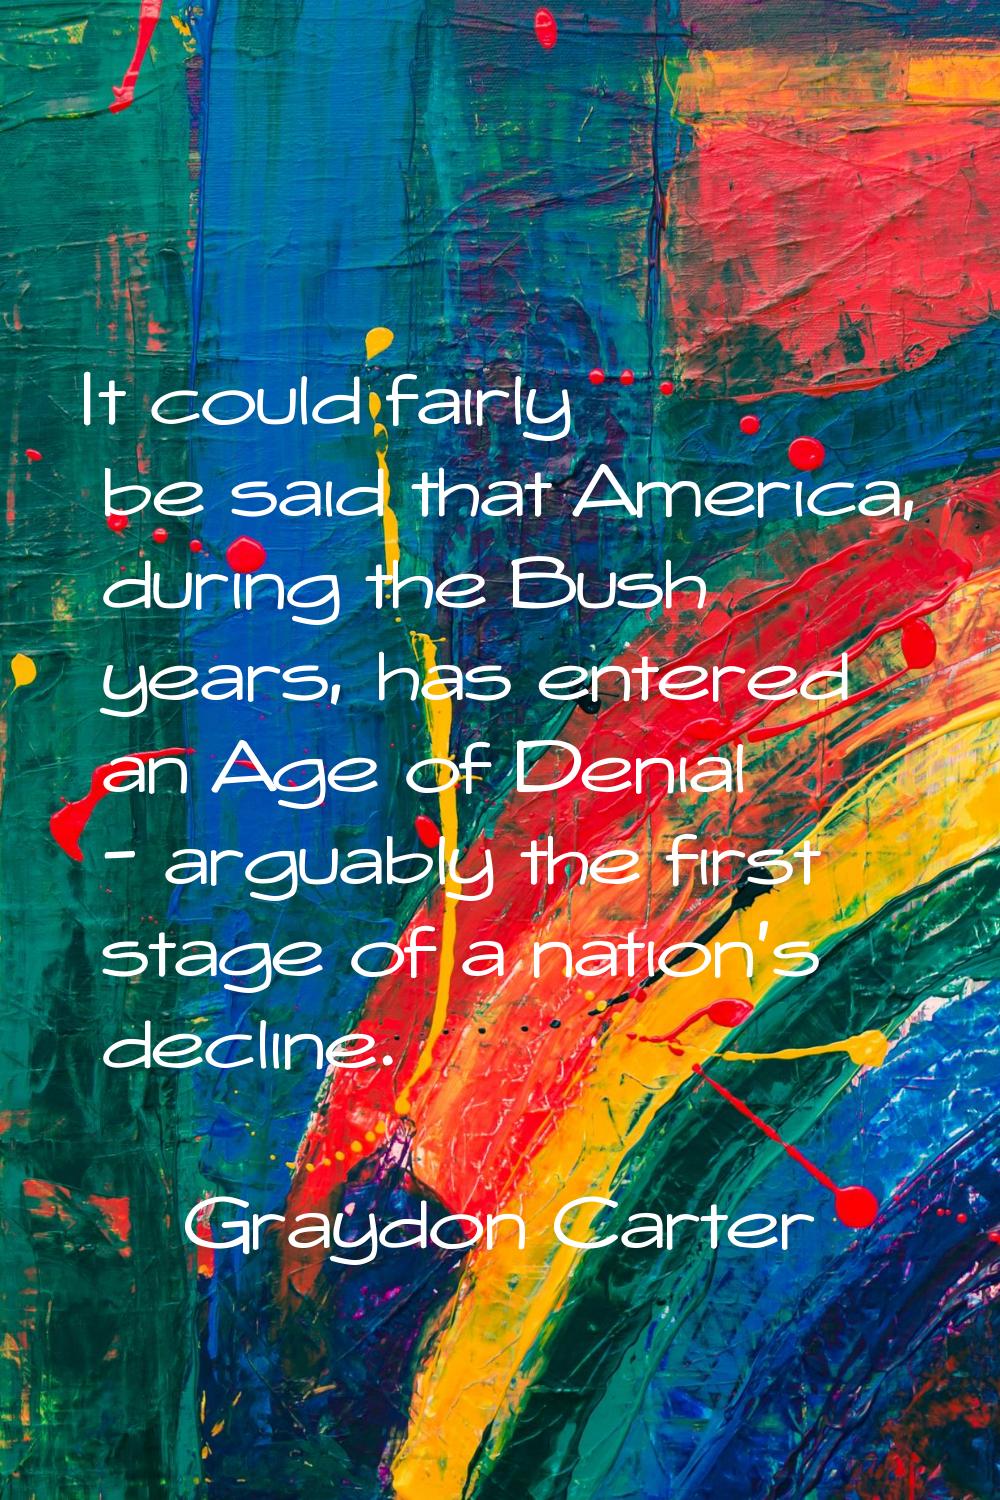 It could fairly be said that America, during the Bush years, has entered an Age of Denial - arguabl